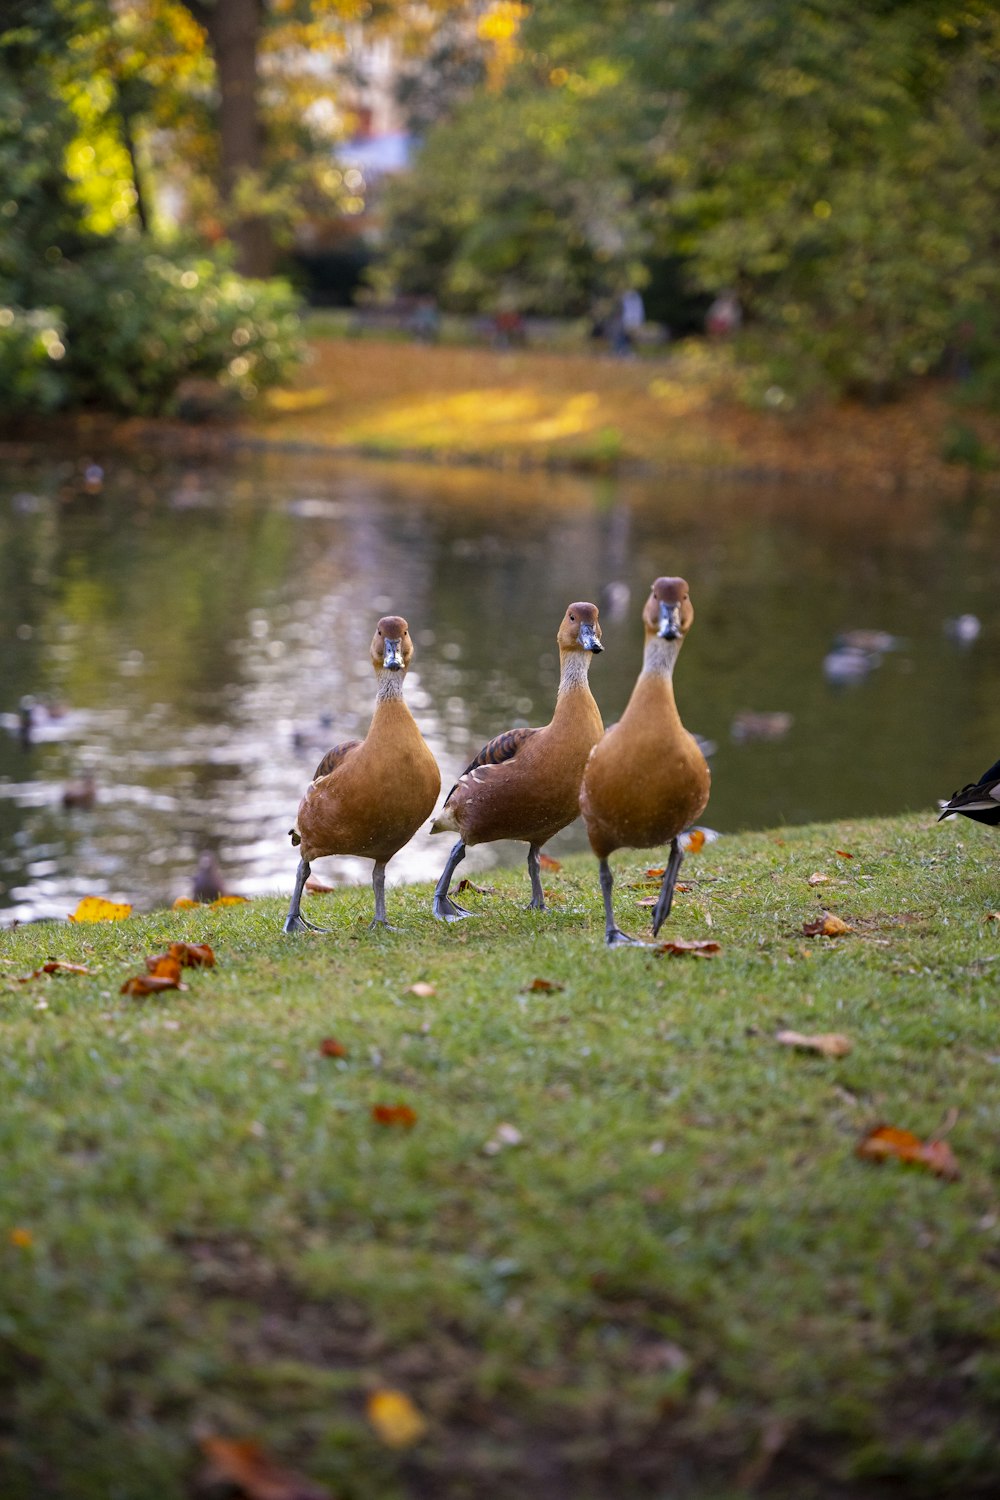 a group of ducks walking on grass by a pond